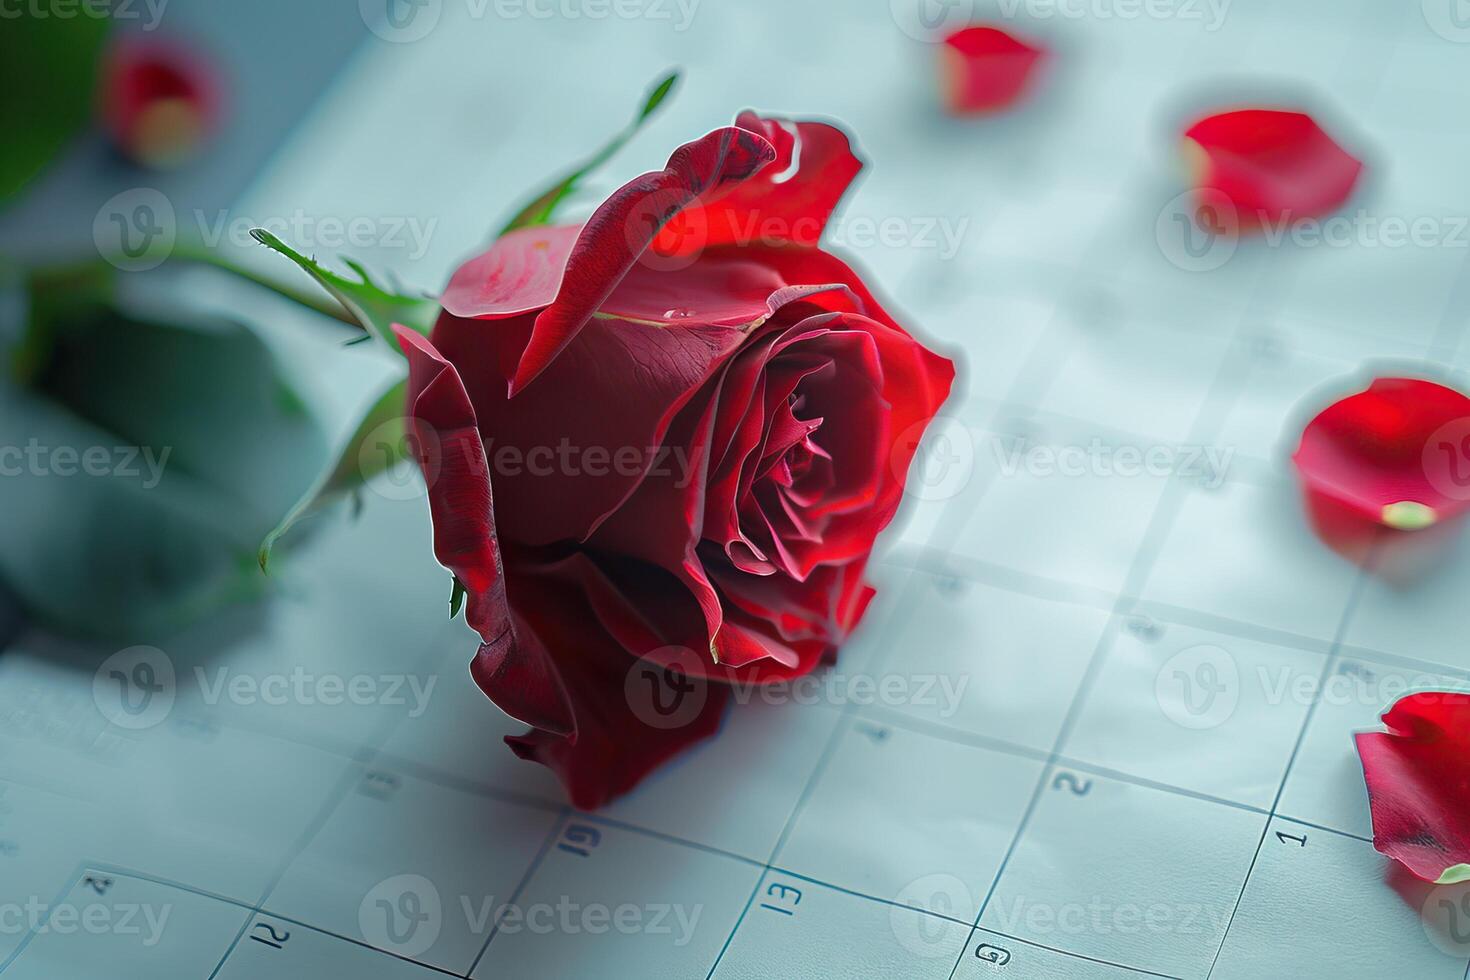 Red rose bud on calendar showing mothers day Red rose bud on calendar showing mothers day photo